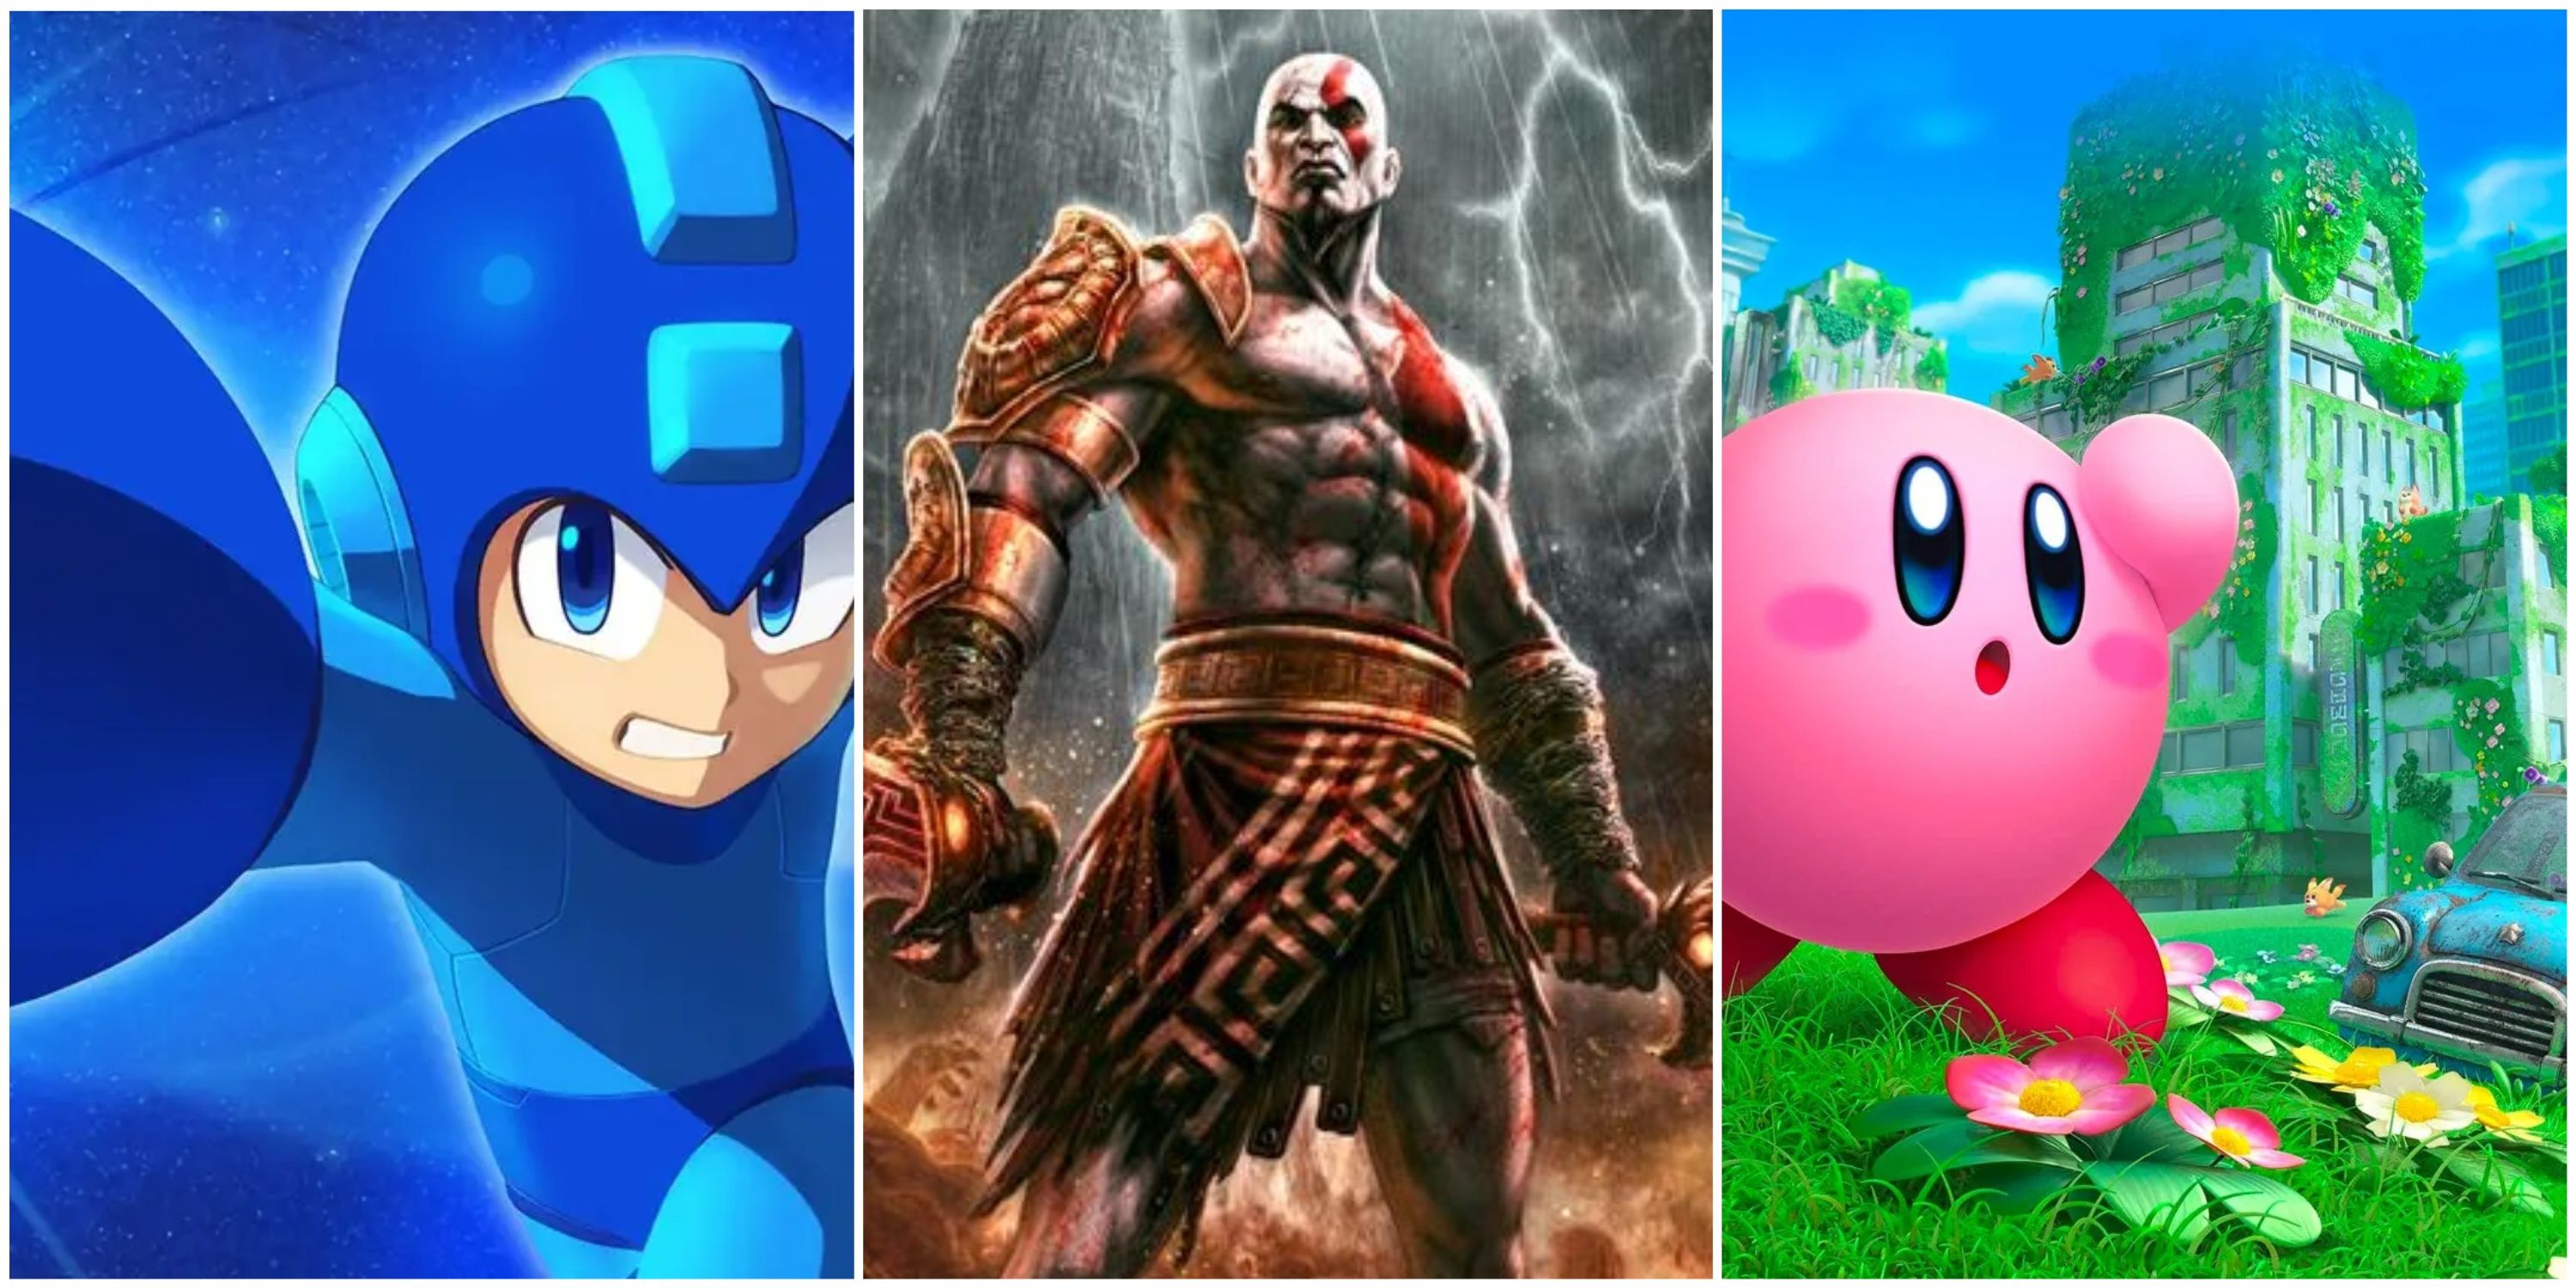 mega man from mega man, kratos from god of war, kirby from Kirby and the Forgotten Land